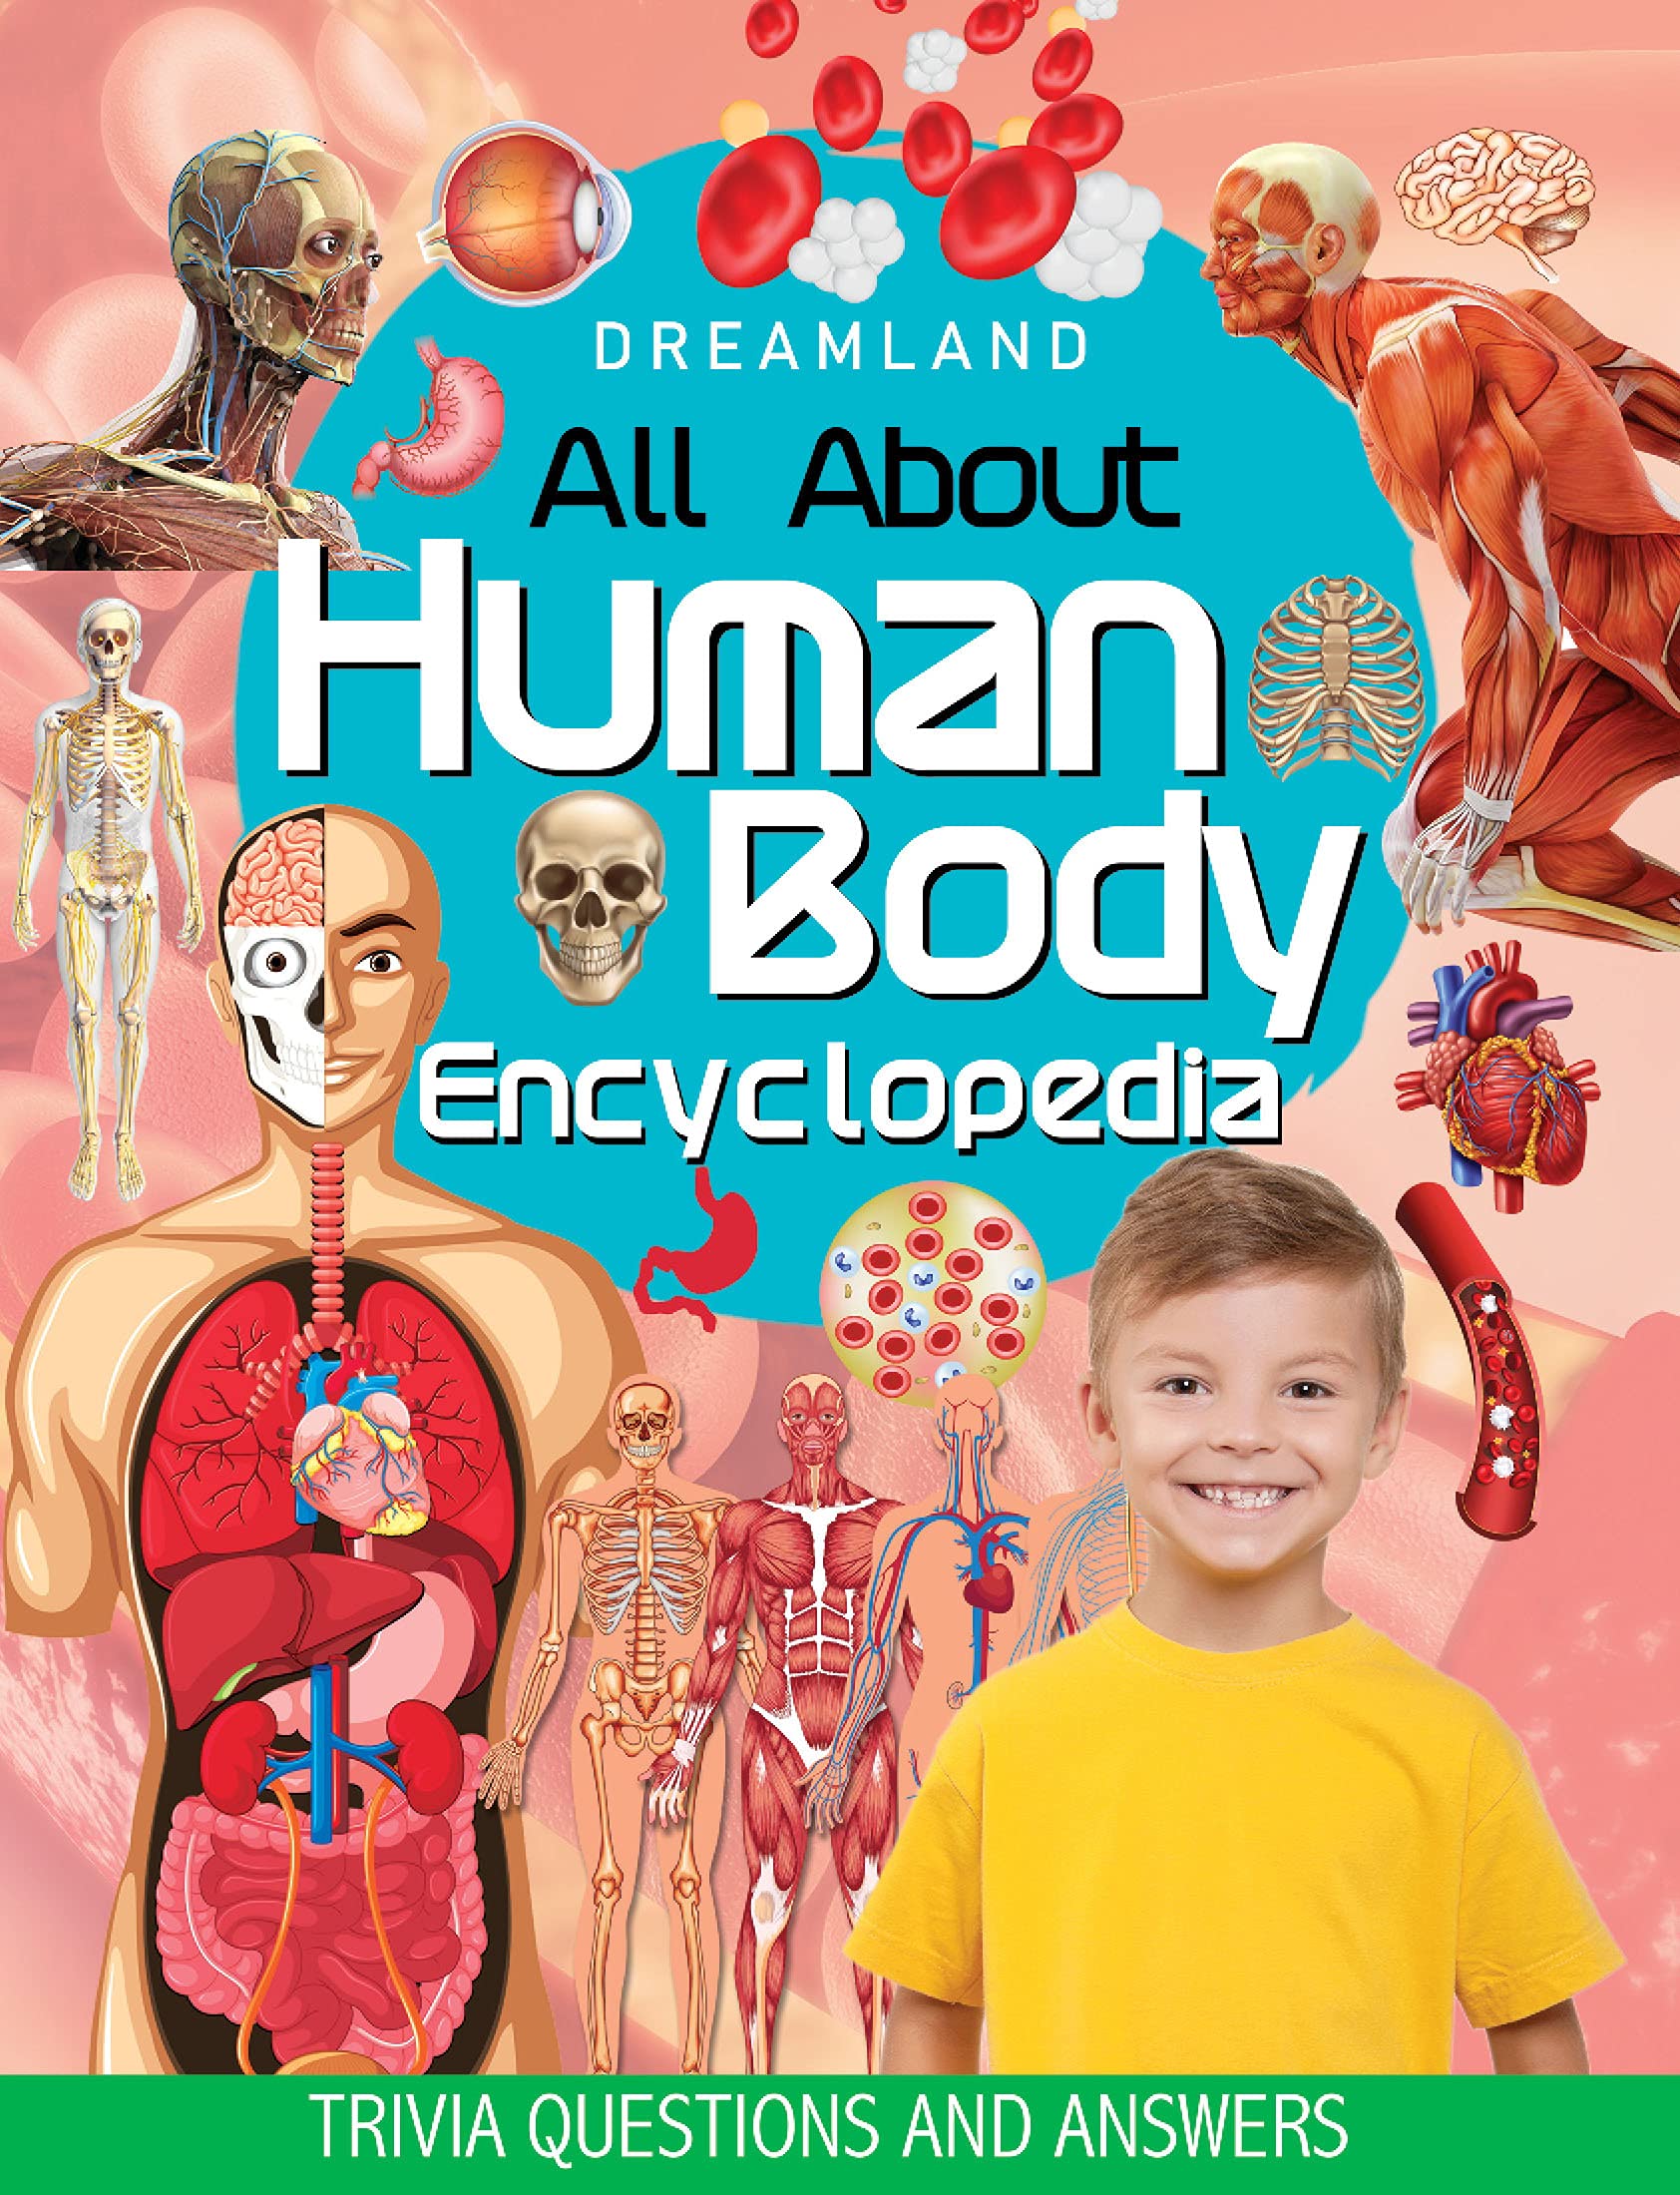 All About Human Body Encyclopedia for Children Age 5 - 10